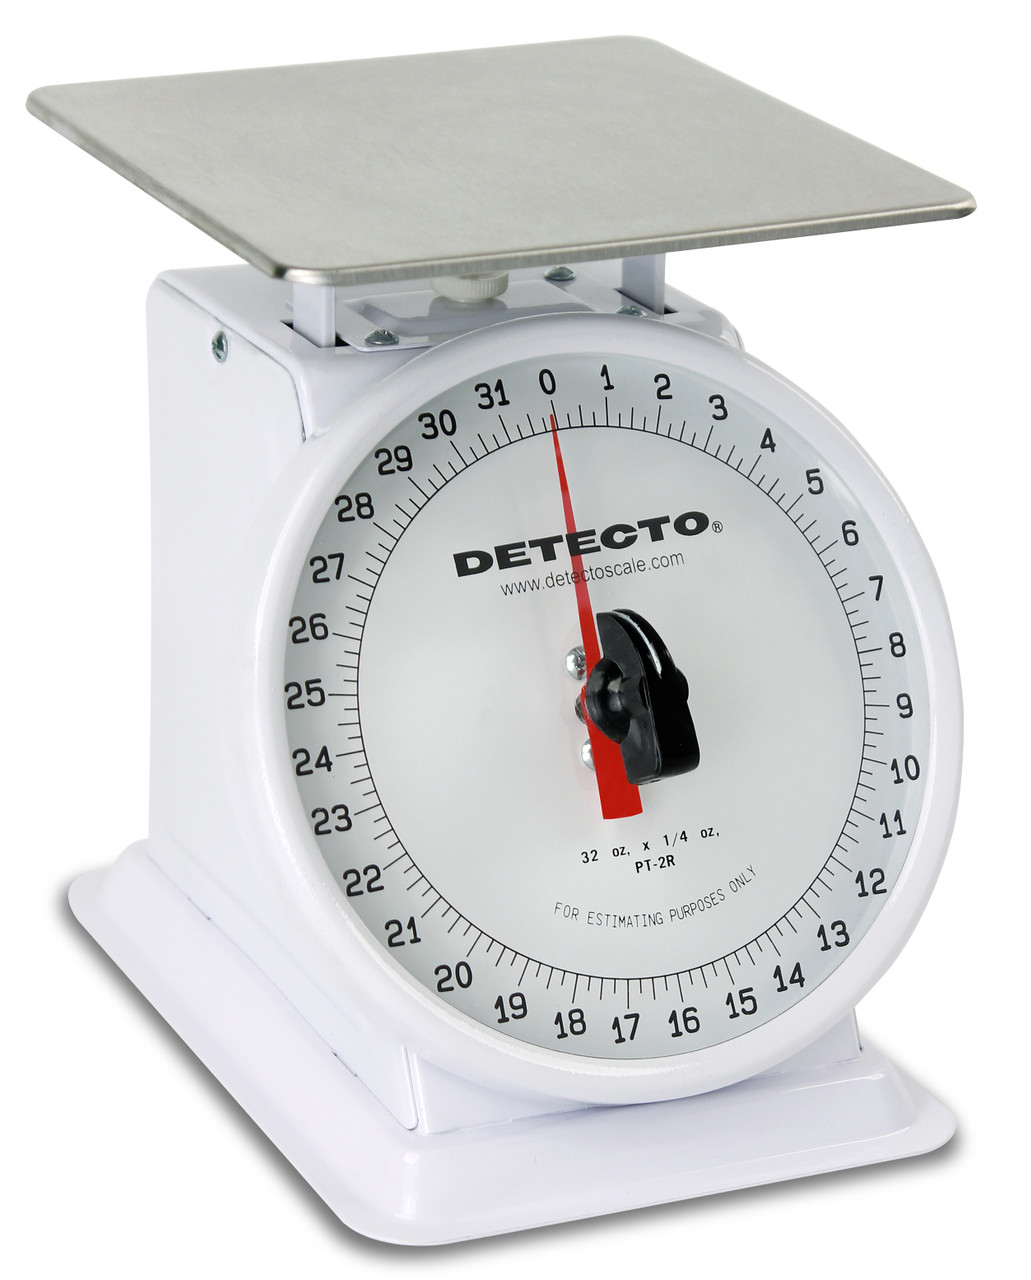 Cardinal Detecto 32 Oz Top Load Rotating Dial Scale 5.75" x 5.75", Model# PT-2R